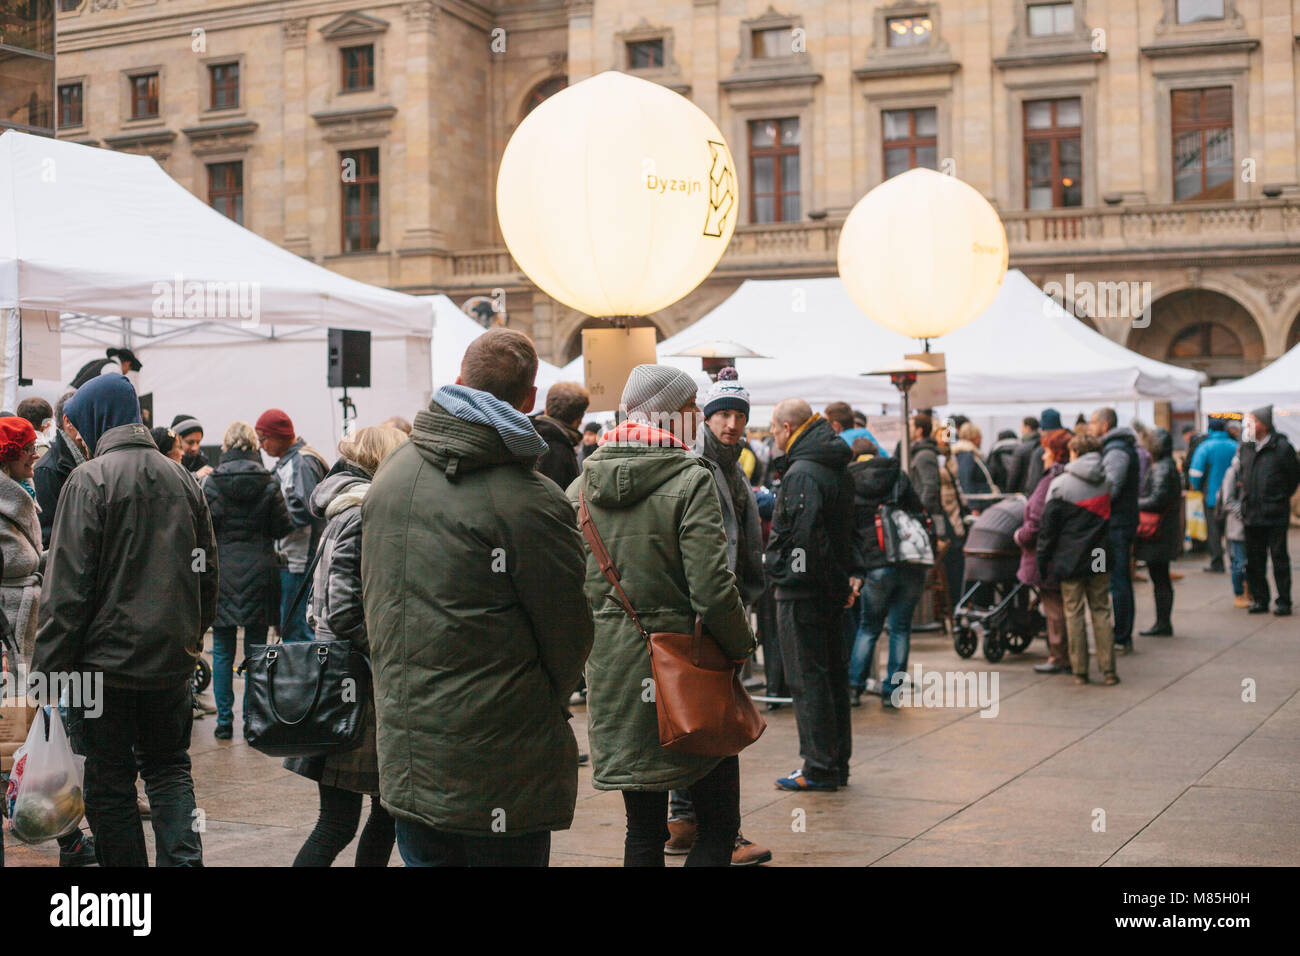 Design market in Prague - crowd of people walks between the designers' shops in square on the background of old building Stock Photo